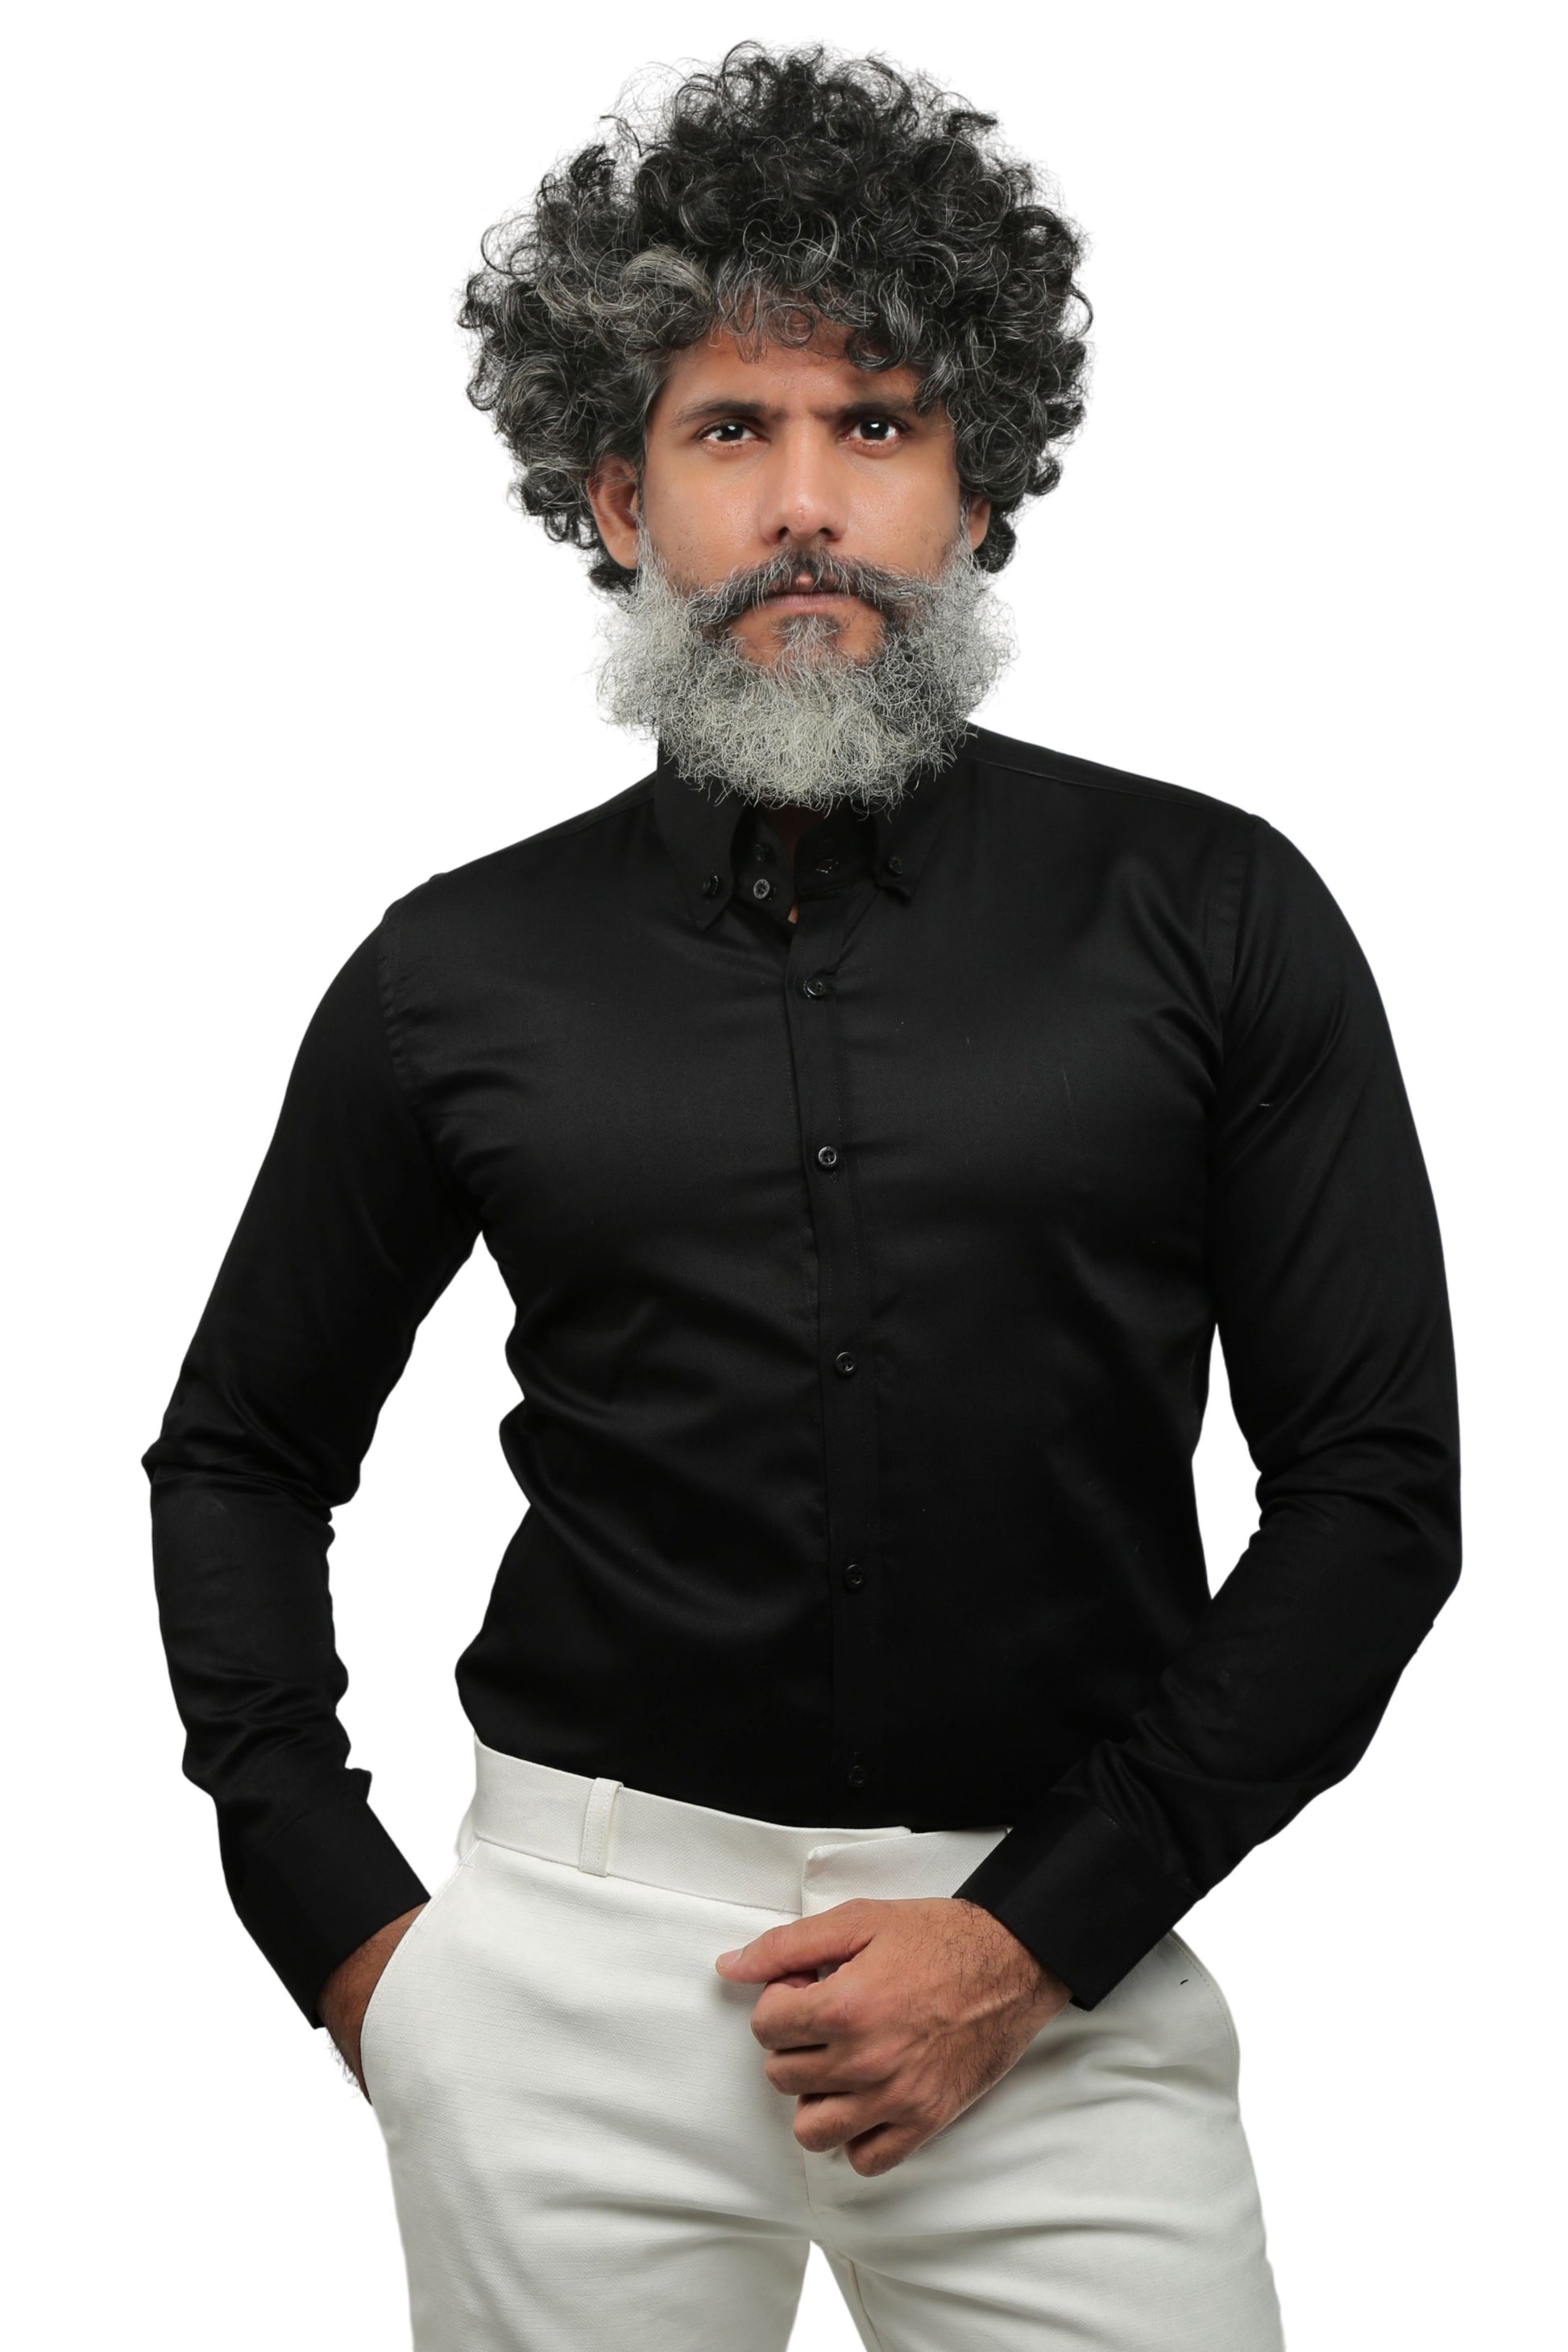 Black Formal Shirt with Button Down Collar